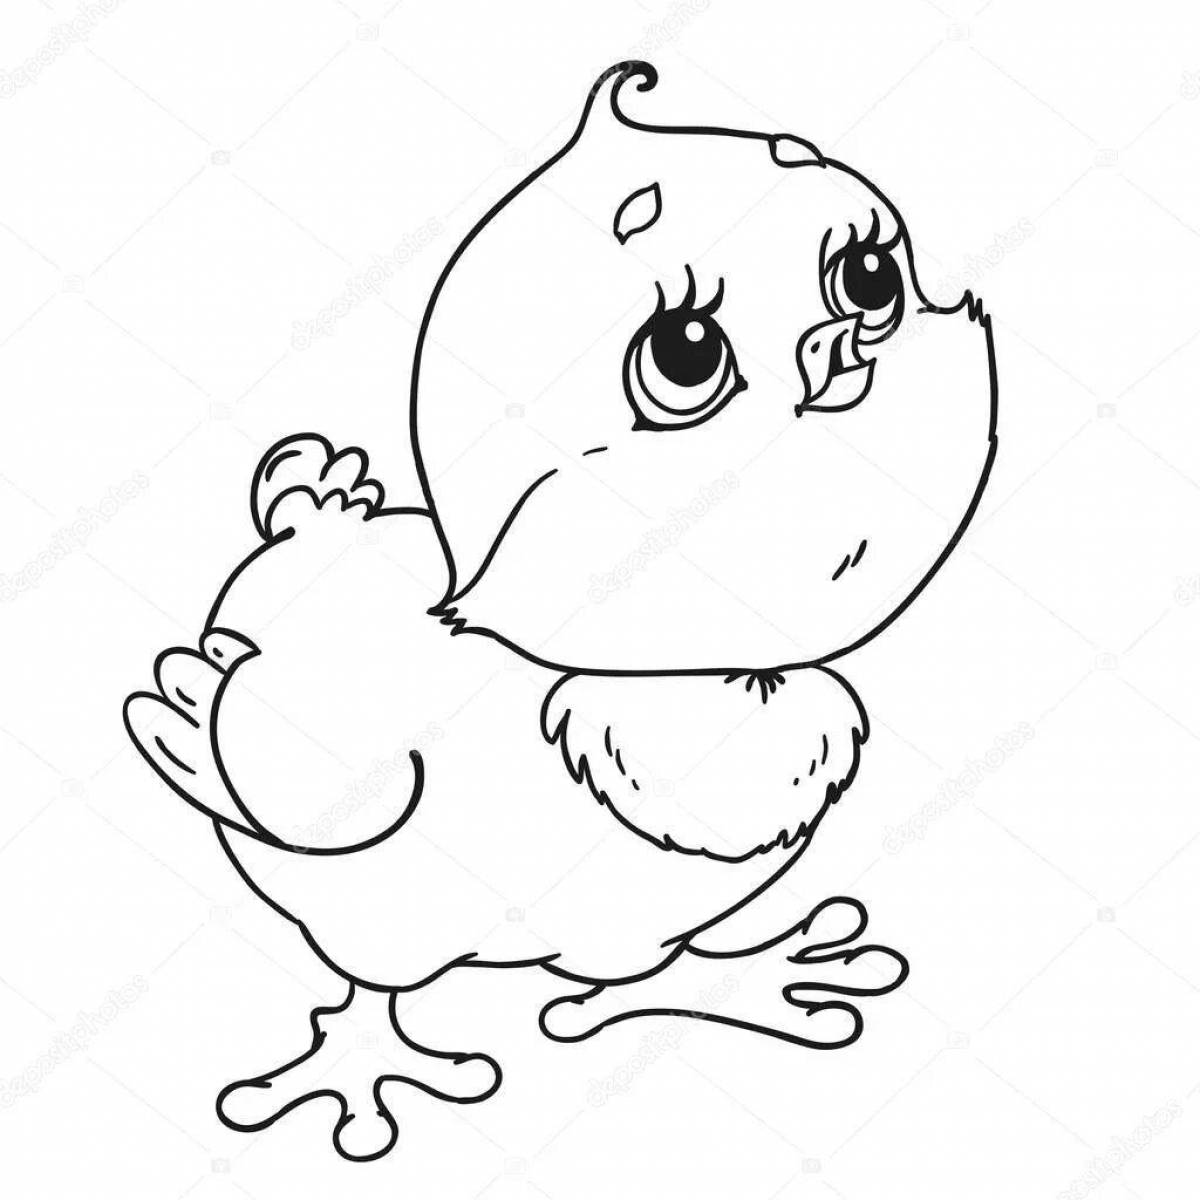 Chicken and duckling coloring page